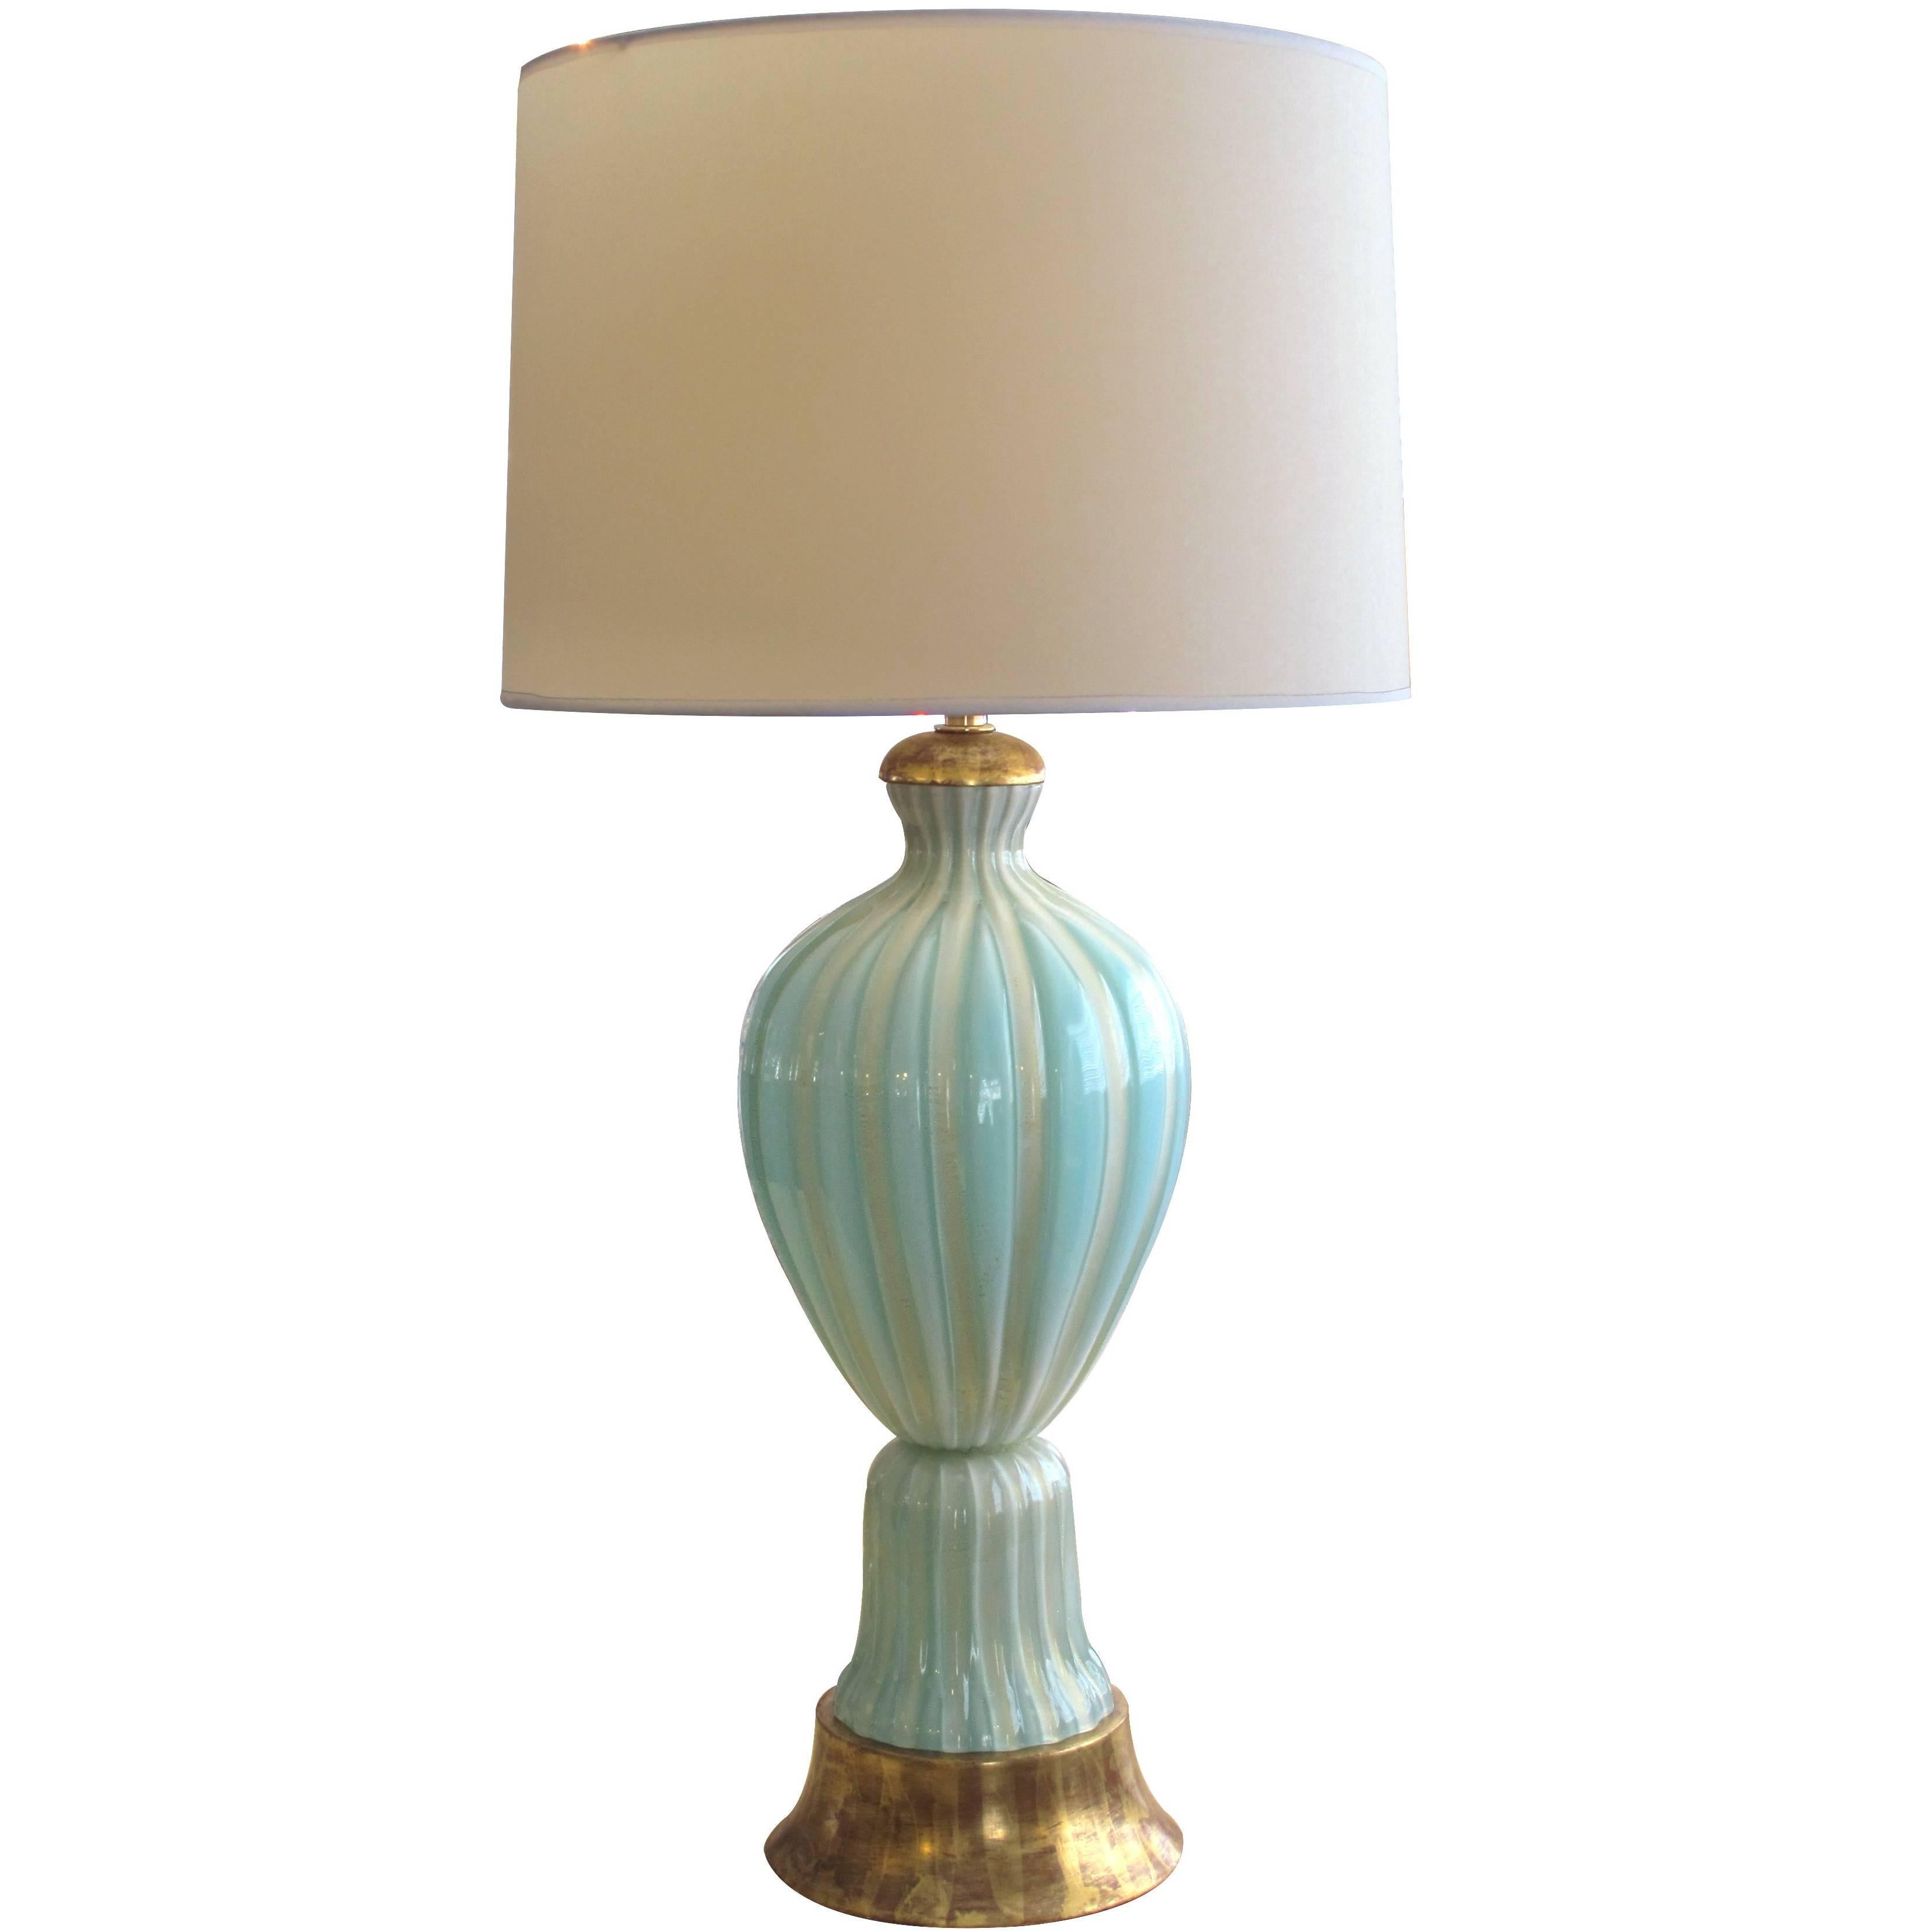 Large and Good Quality Murano 1950s Barovier and Toso Seafoam Green Lamp